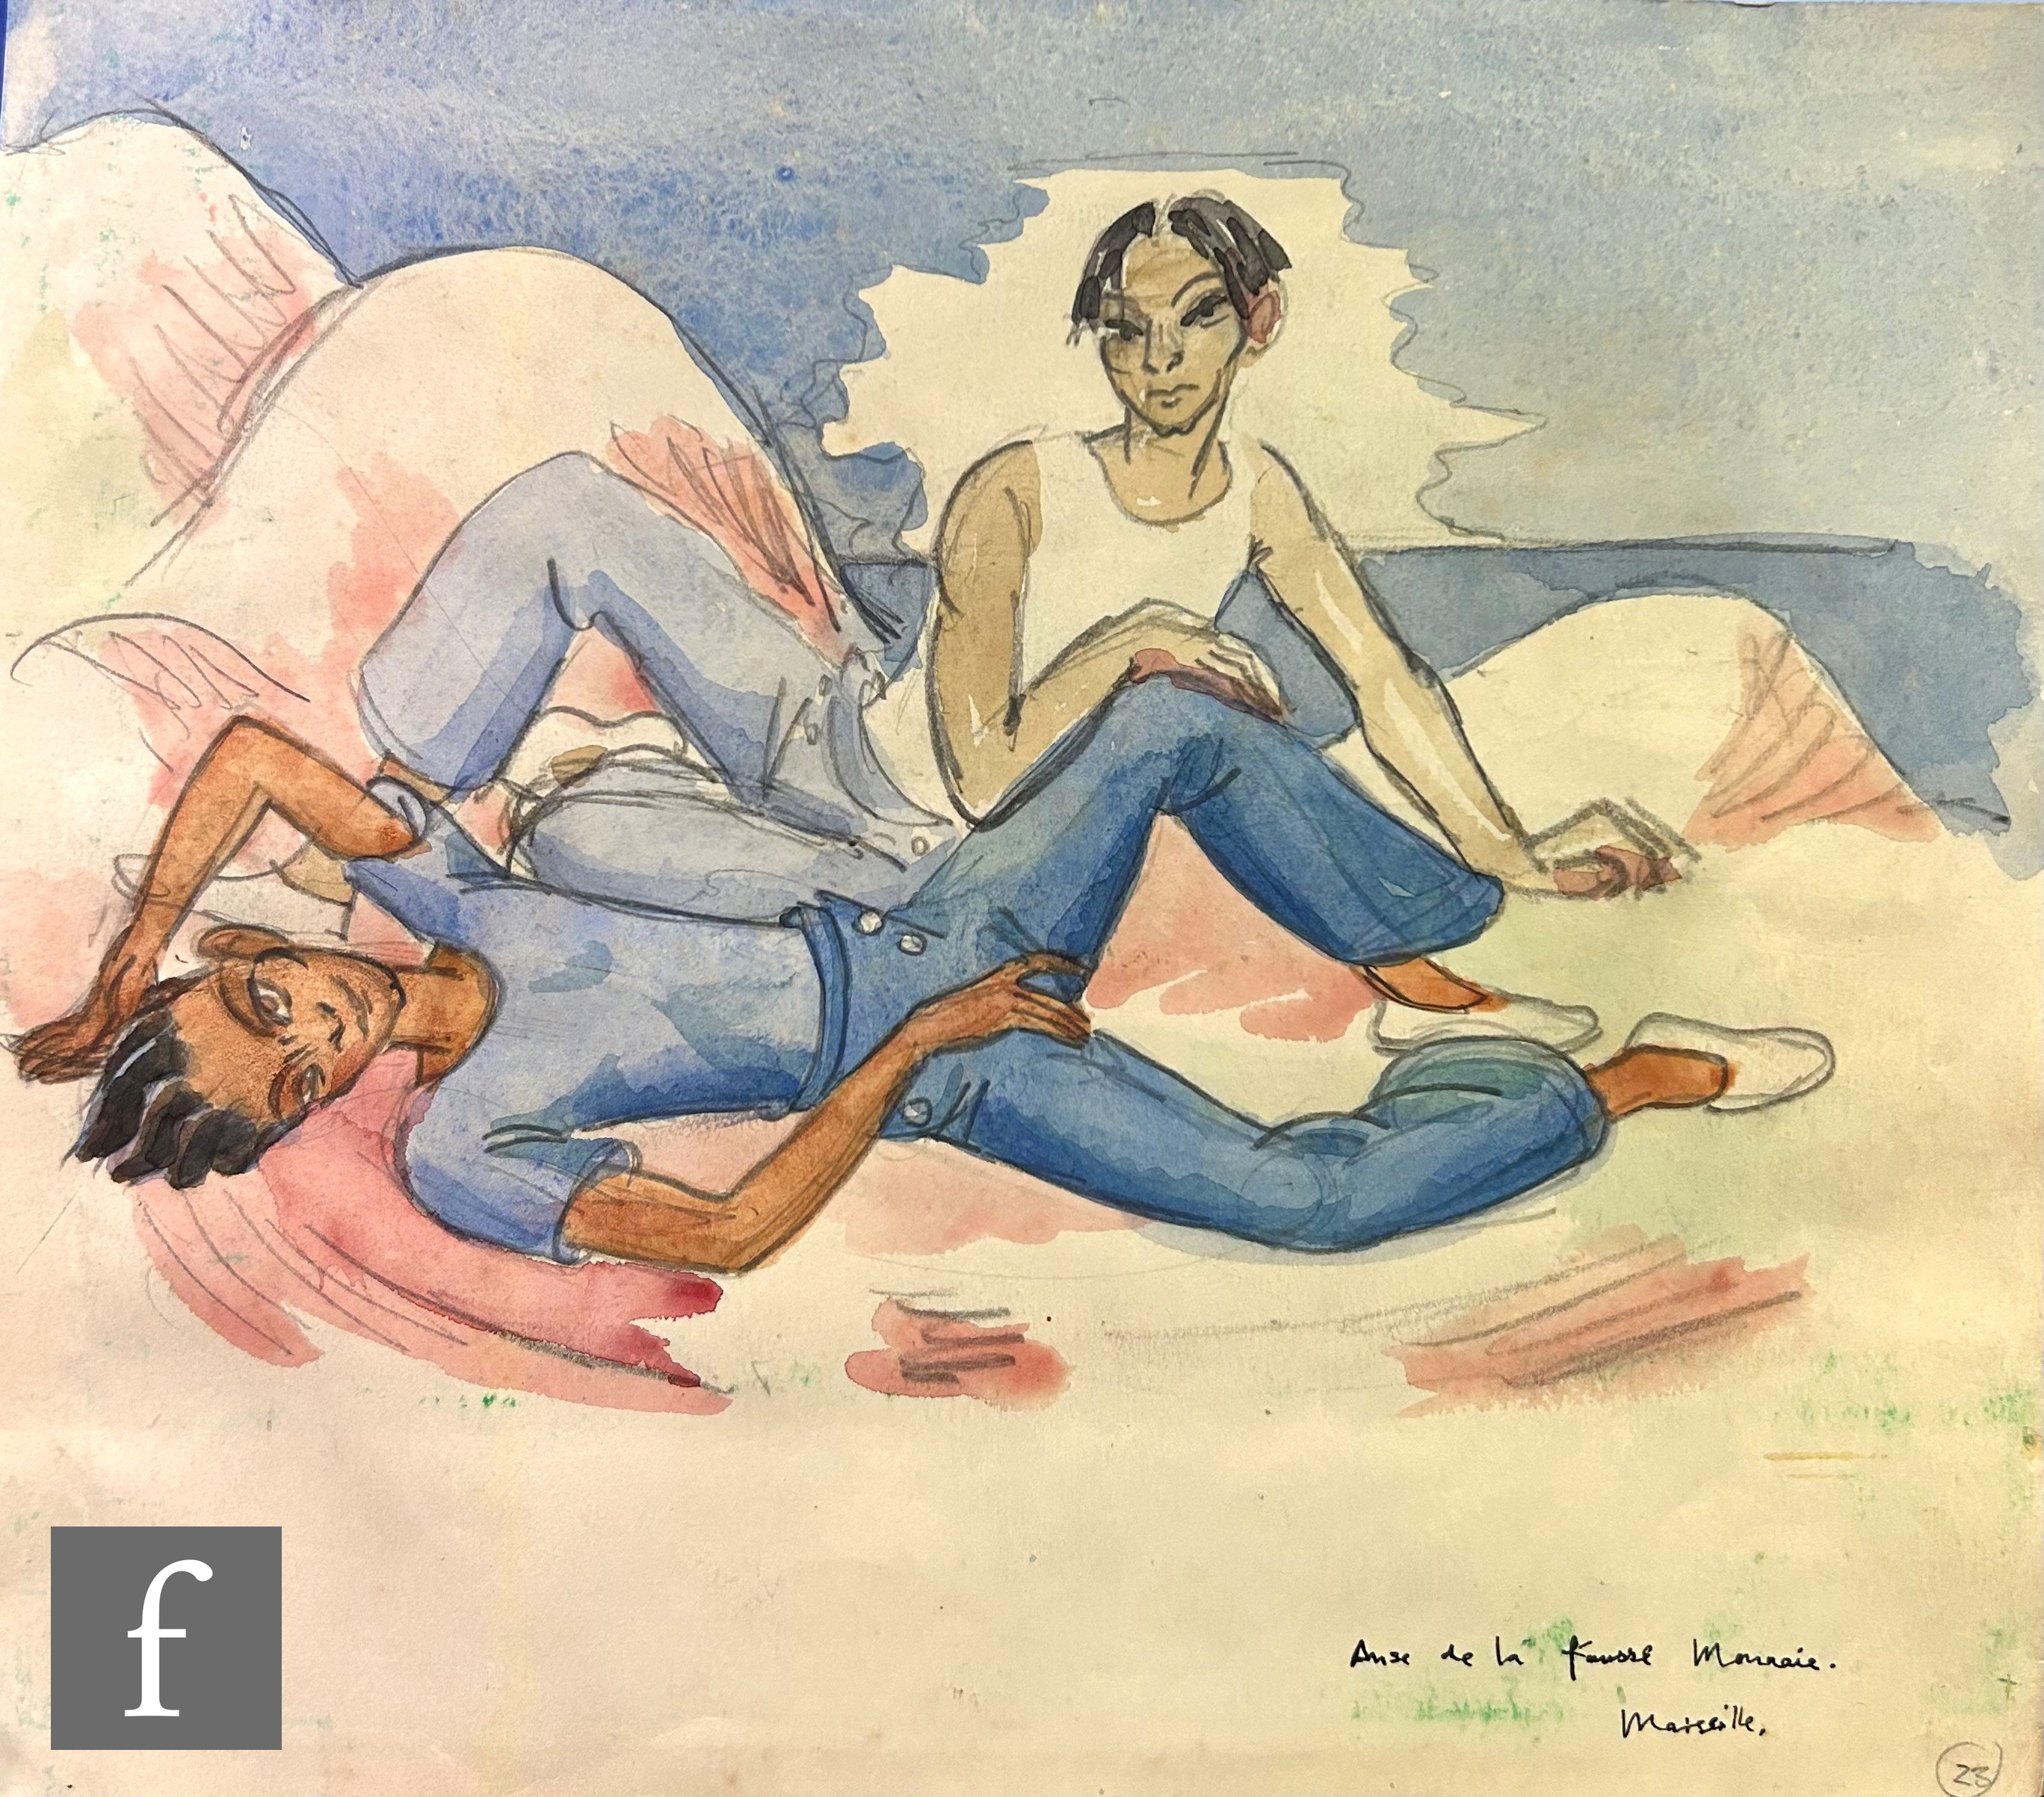 Albert Wainwright (1898-1943) - A sketch depicting two reclining male figures before a sea